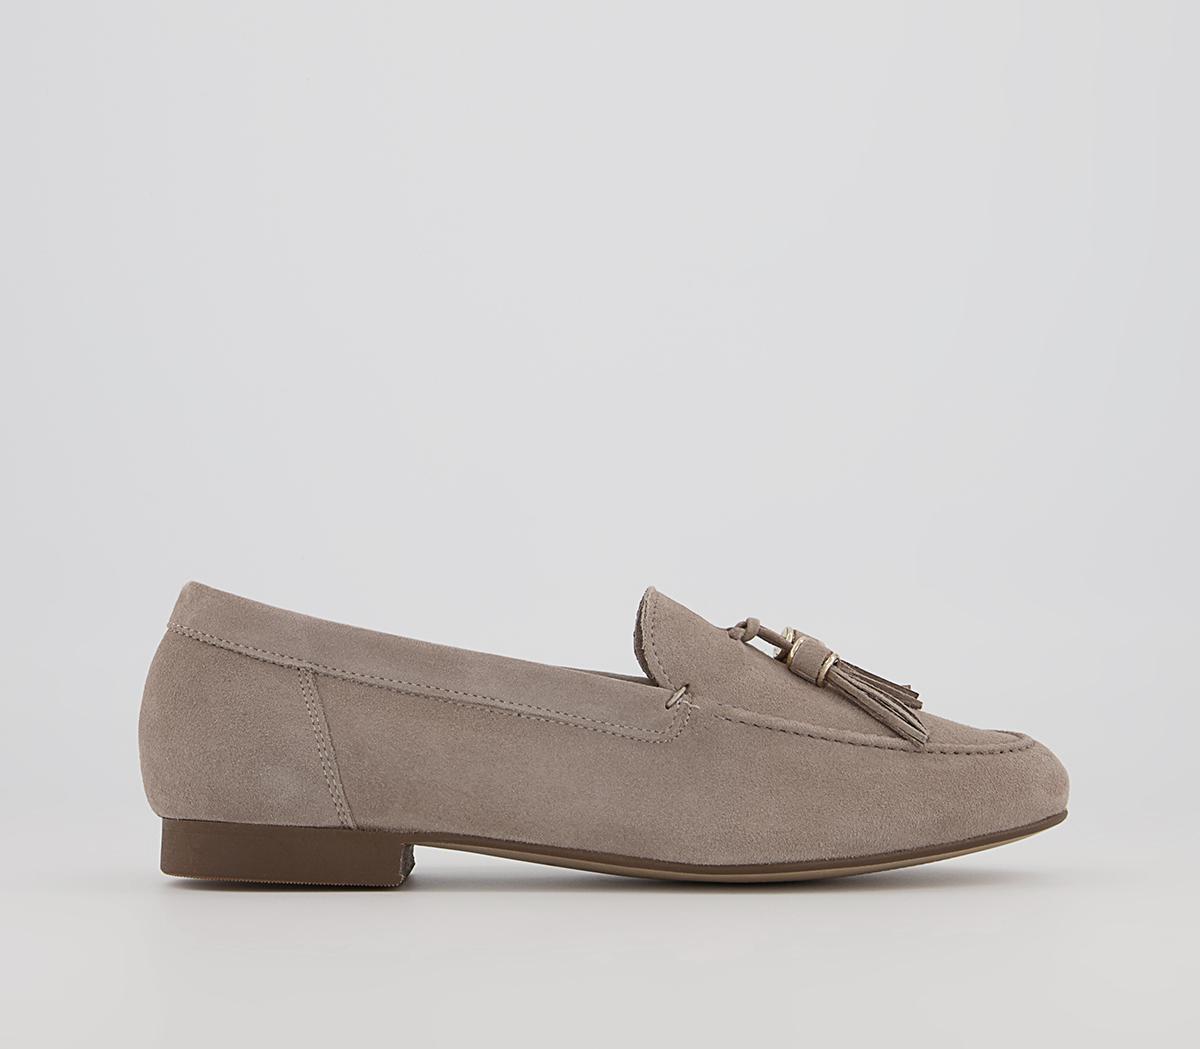 Flick Retro Tassel Loafers Taupe Suede